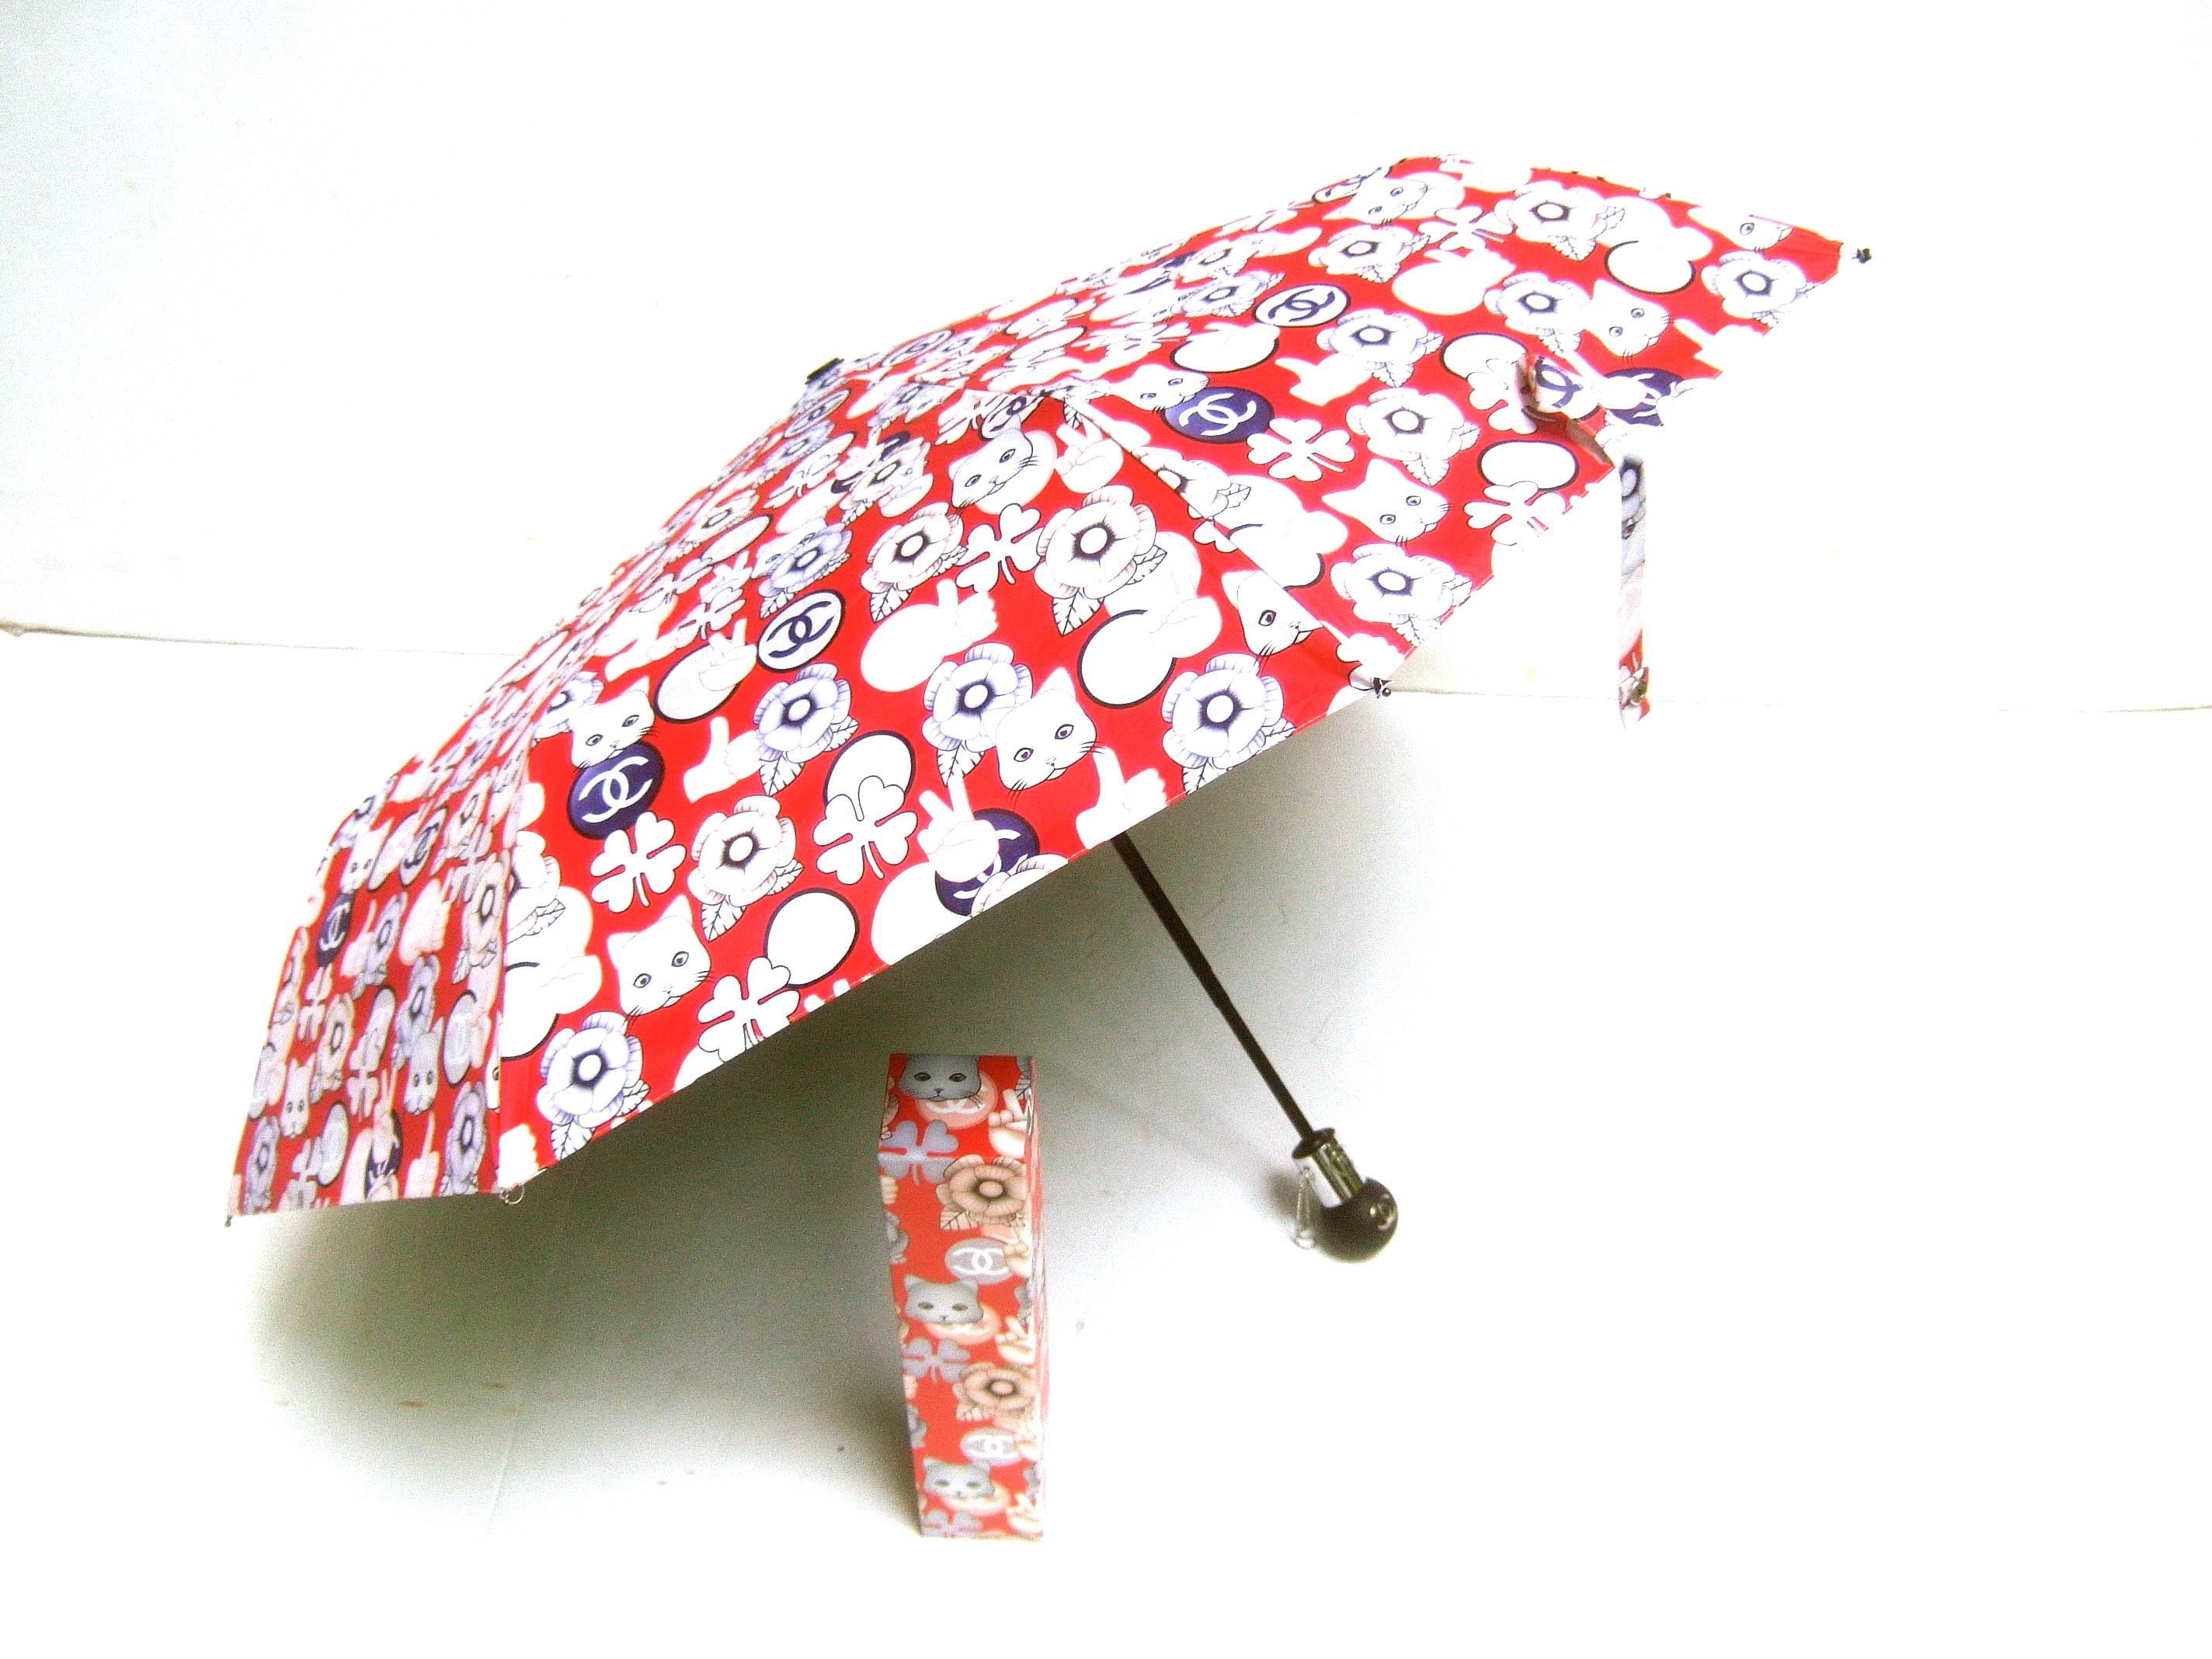 Chanel Whimsical cat theme umbrella in Chanel box 
The stylish red nylon Chanel umbrella is designed with 
cat faces, four-leaf clovers, camellia flowers, hand symbols
and circular logos with Chanel's C.C. initials 

The black resin orb handle is